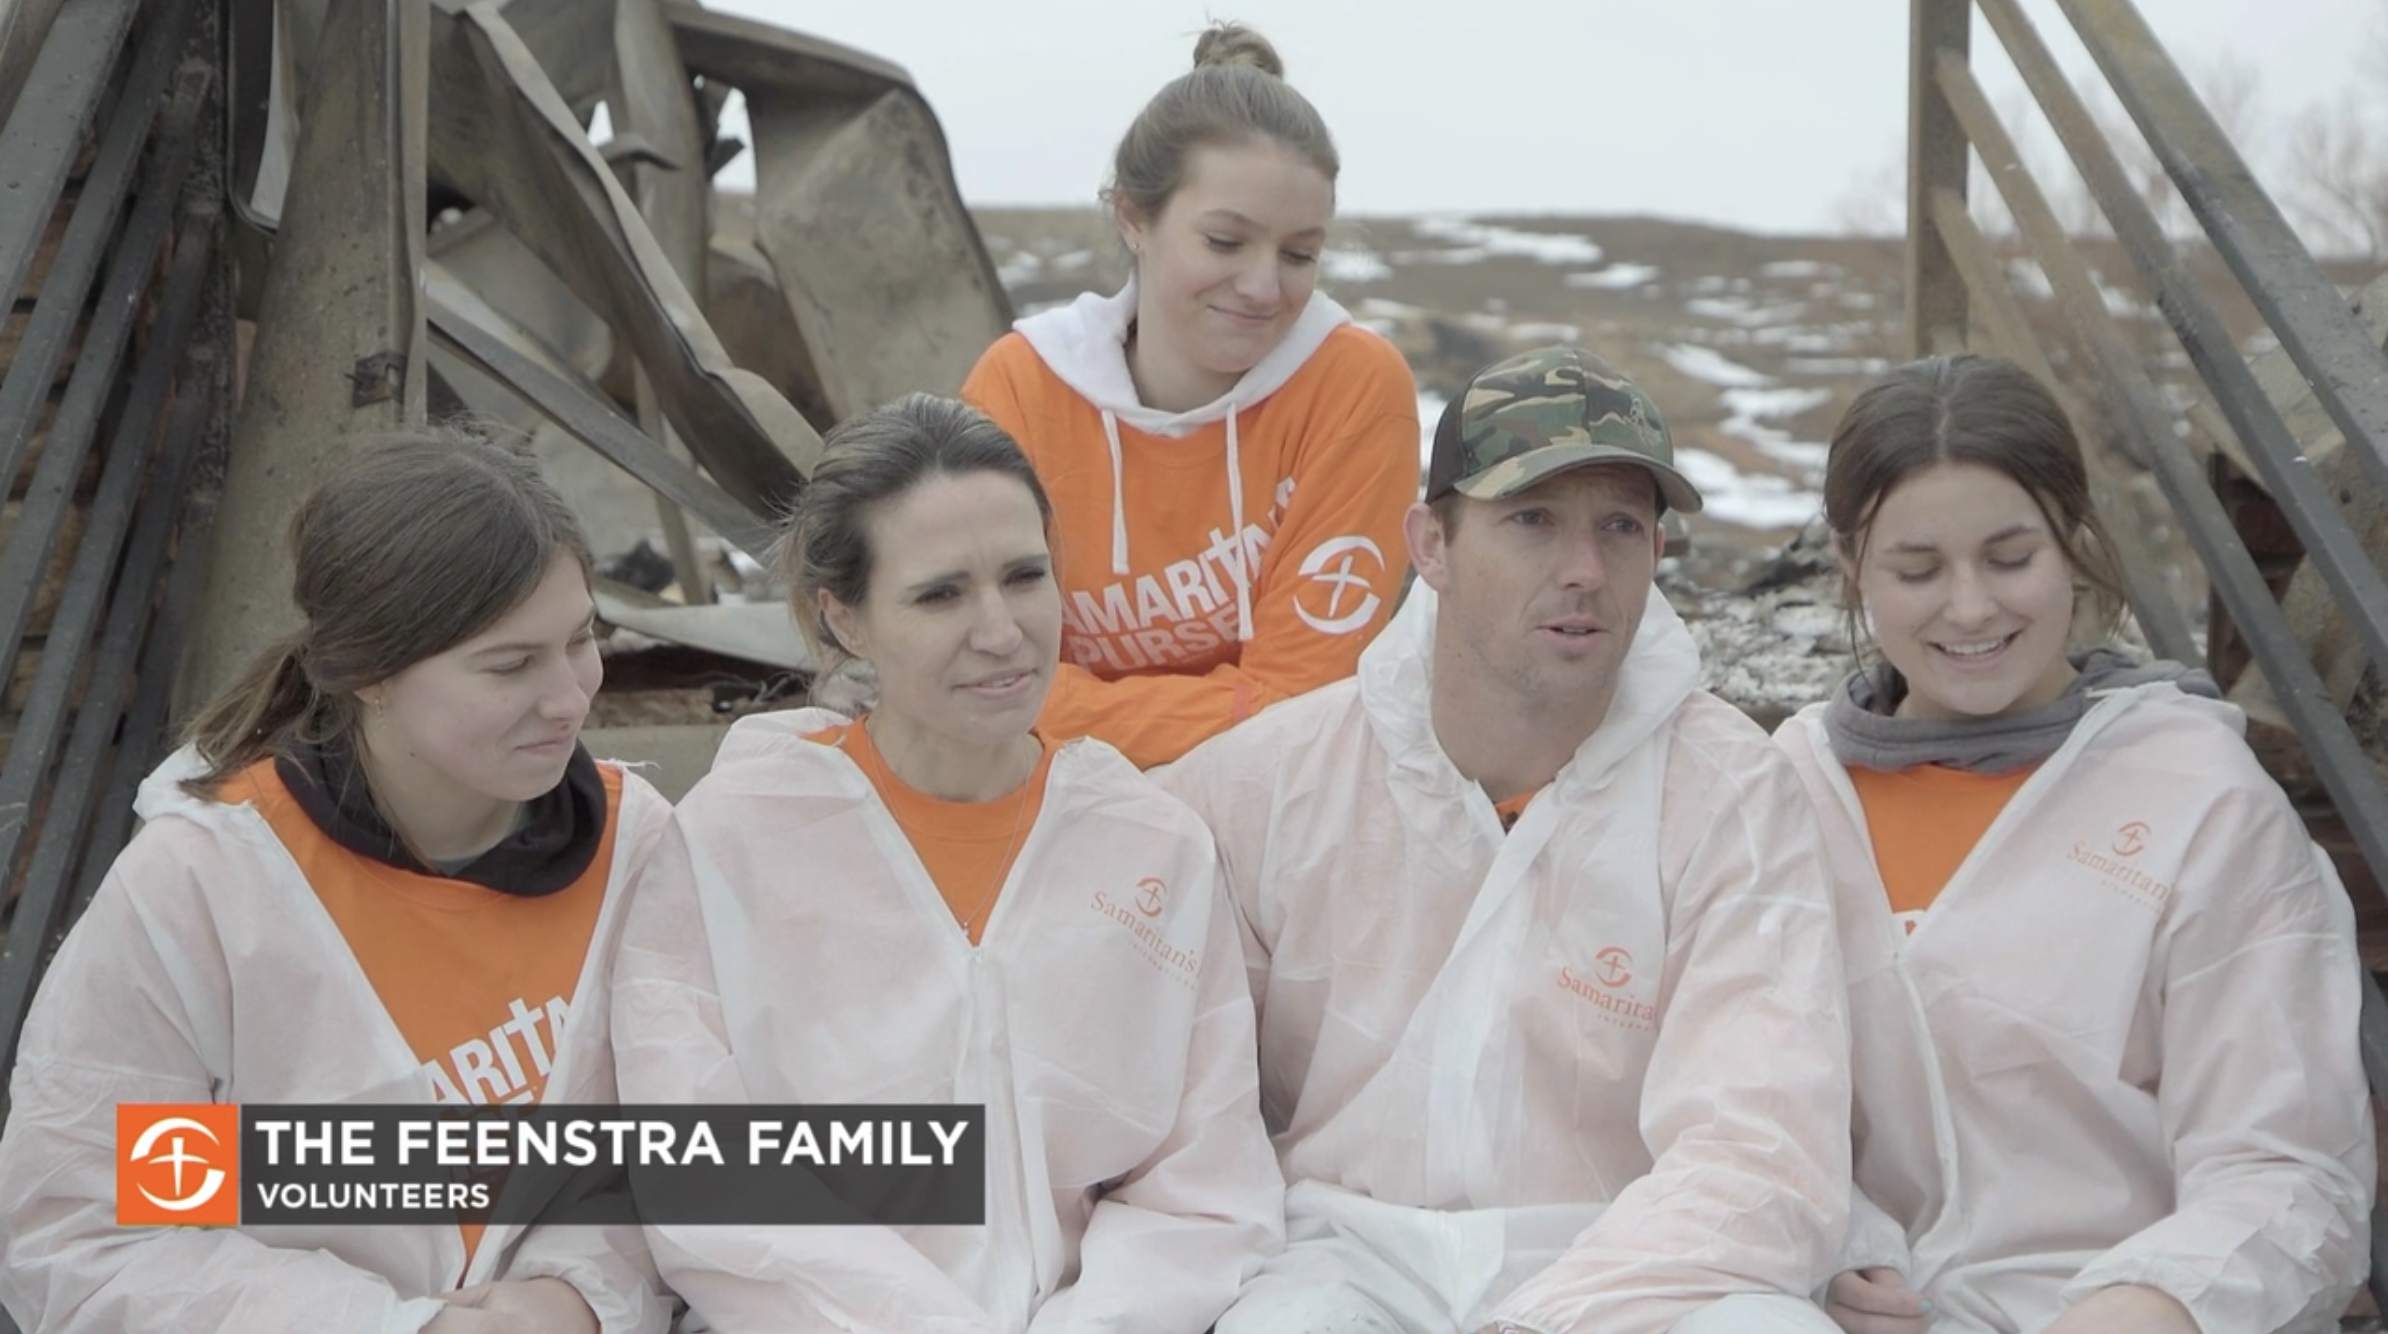 Jacob Feenstra and his family share their experience of helping to sift through the ashes of a house that was destroyed in Colorado Wildfires